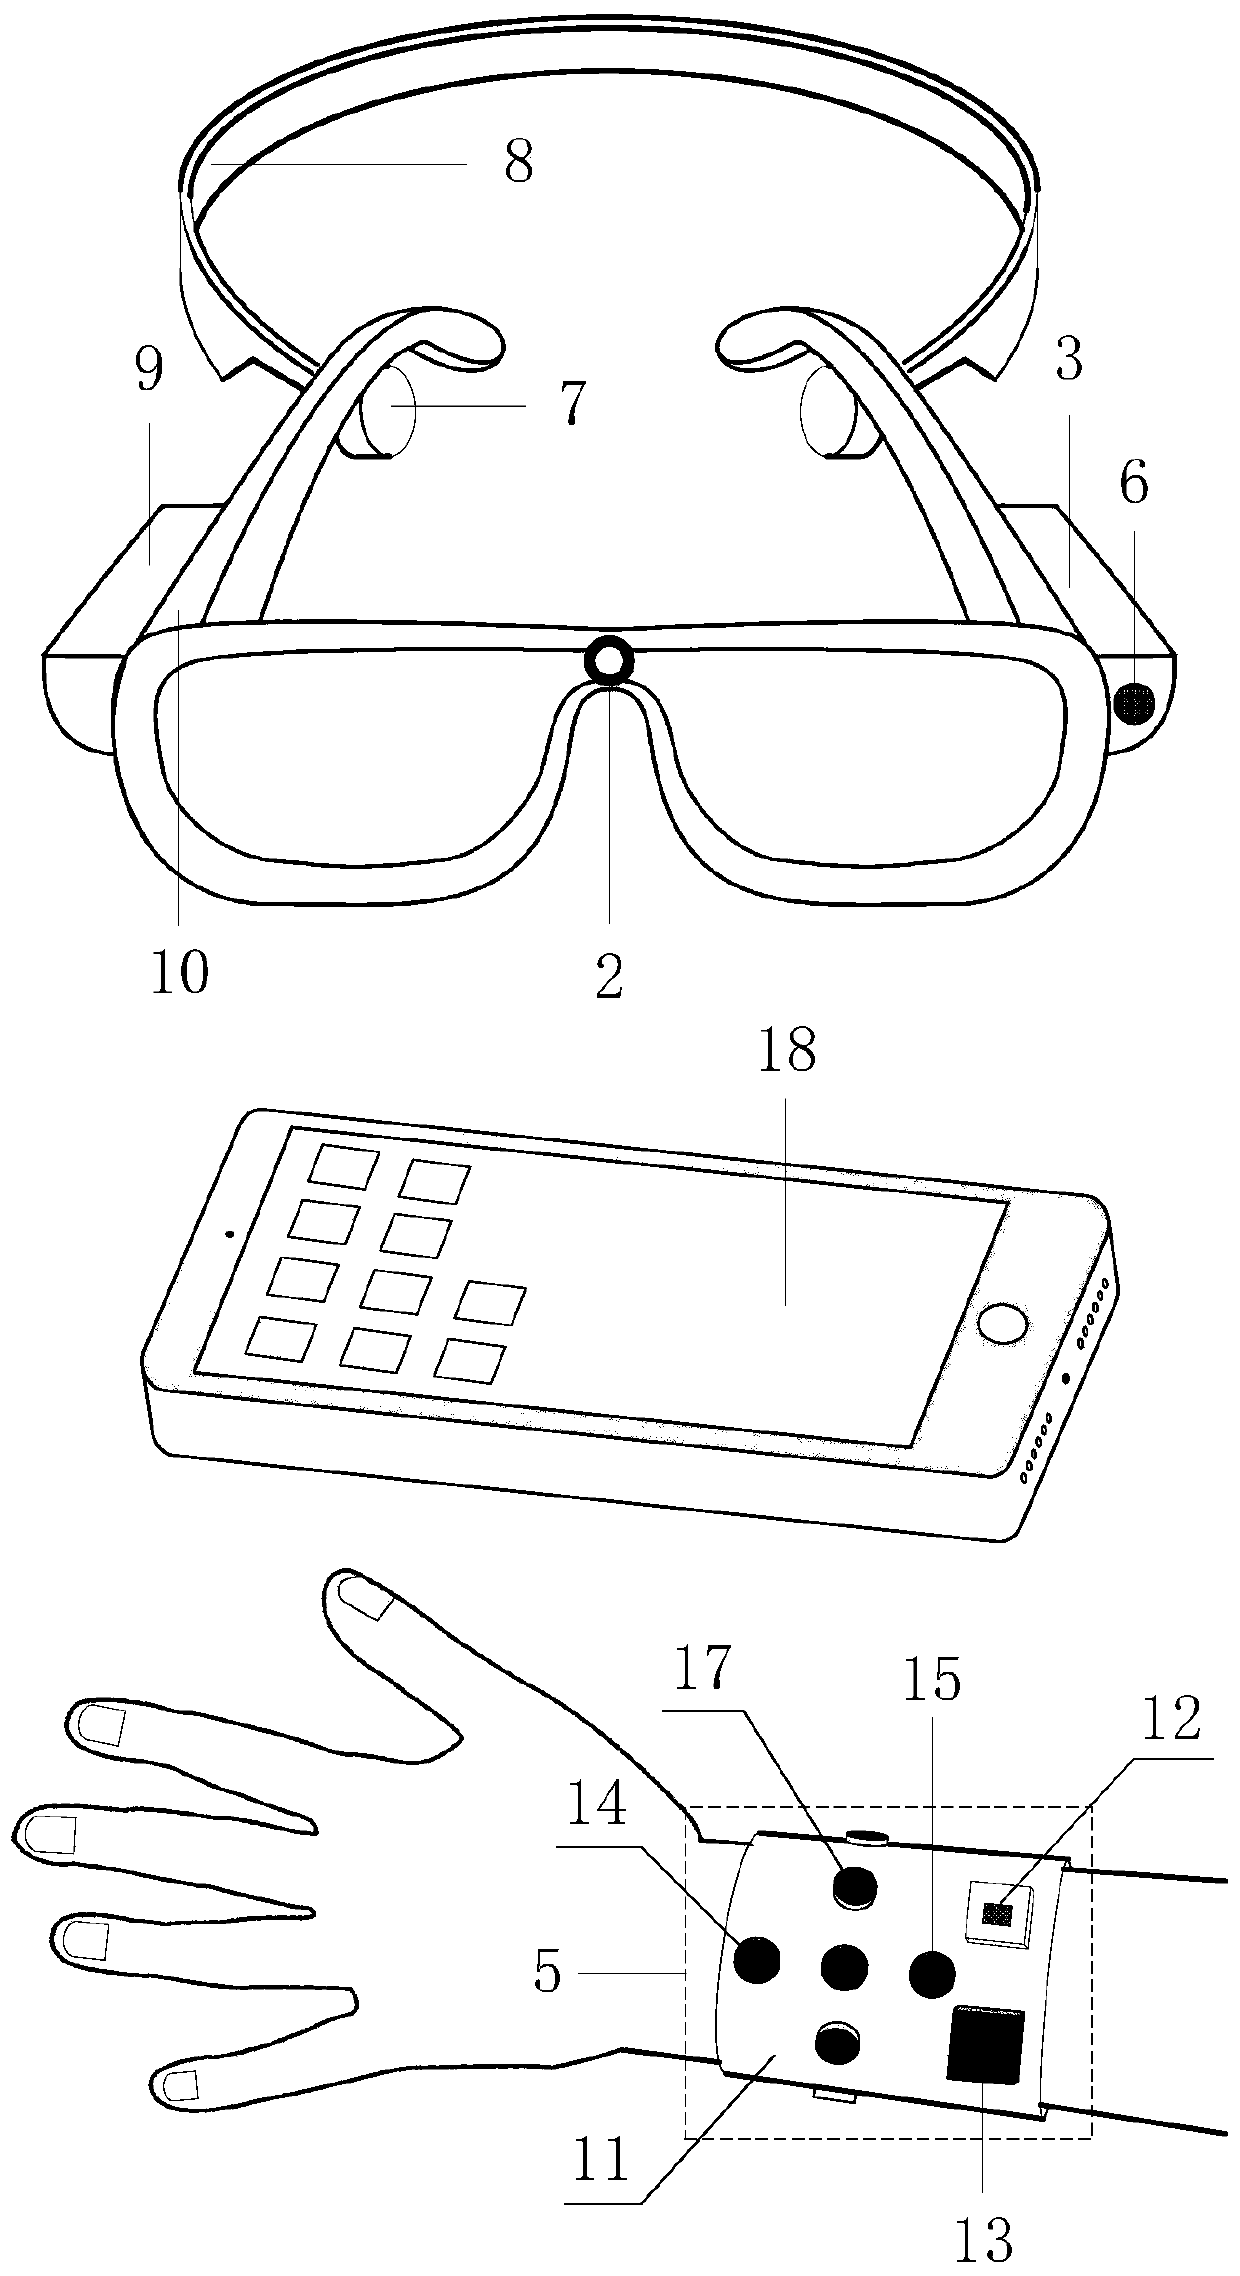 Intelligent blind assisting system and method based on auditory and tactile guidance